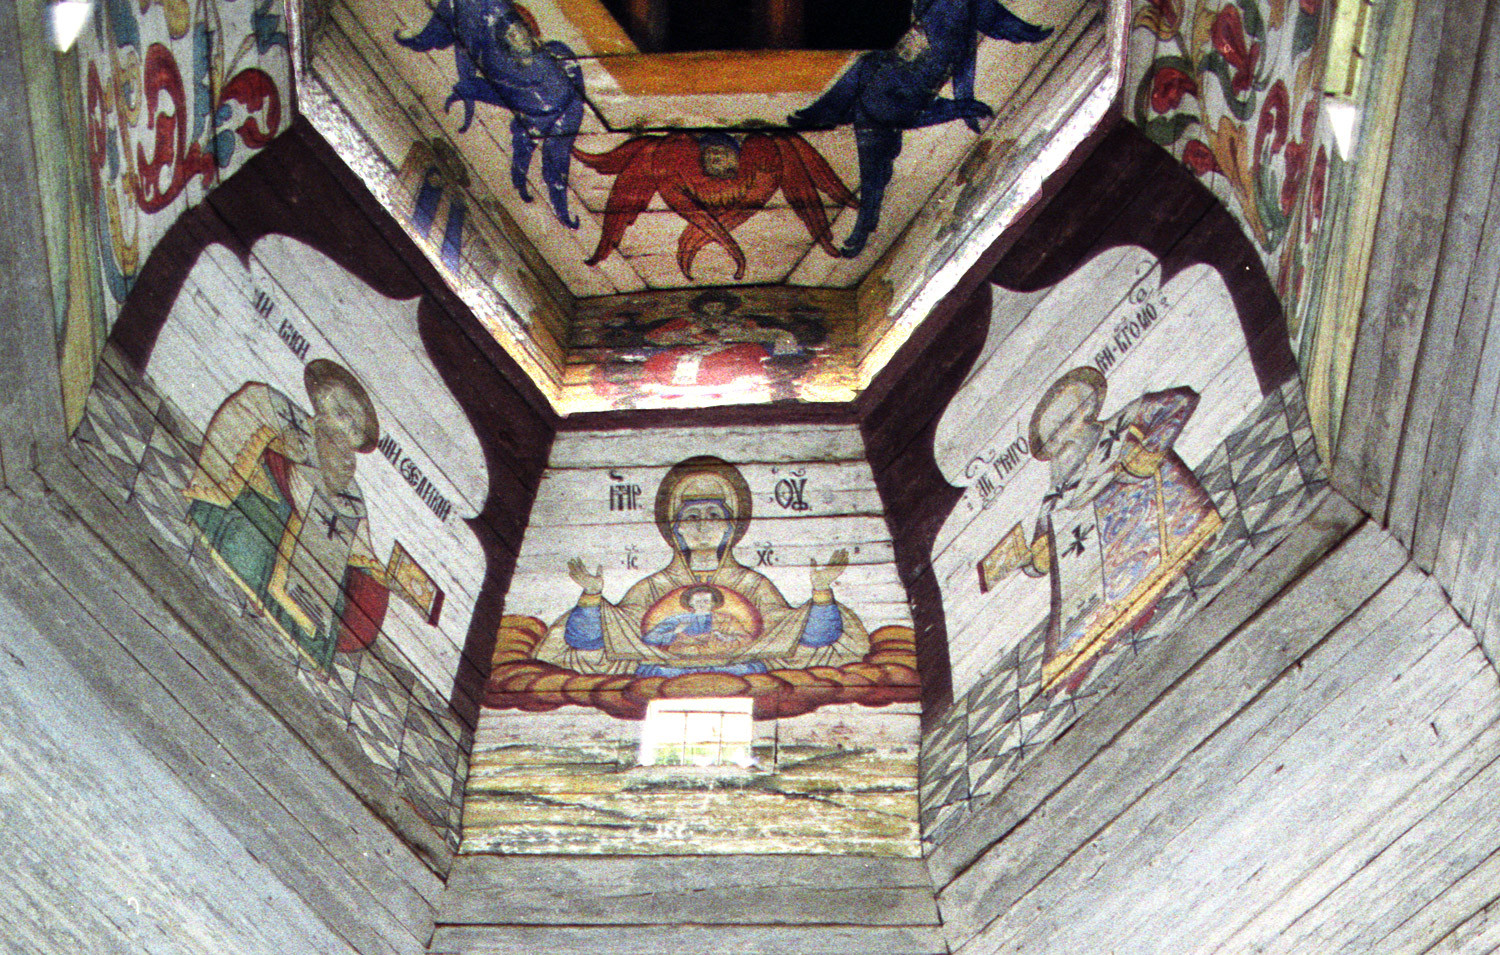 Church of the Tikhvin Icon of the Virgin (Old Church of the Ascension). View of paintings on east wall of upper tier. From left: St. Basil the Great, Virgin Mary of the Sign, St. Gregory the Theologian. Aug. 19, 2006.